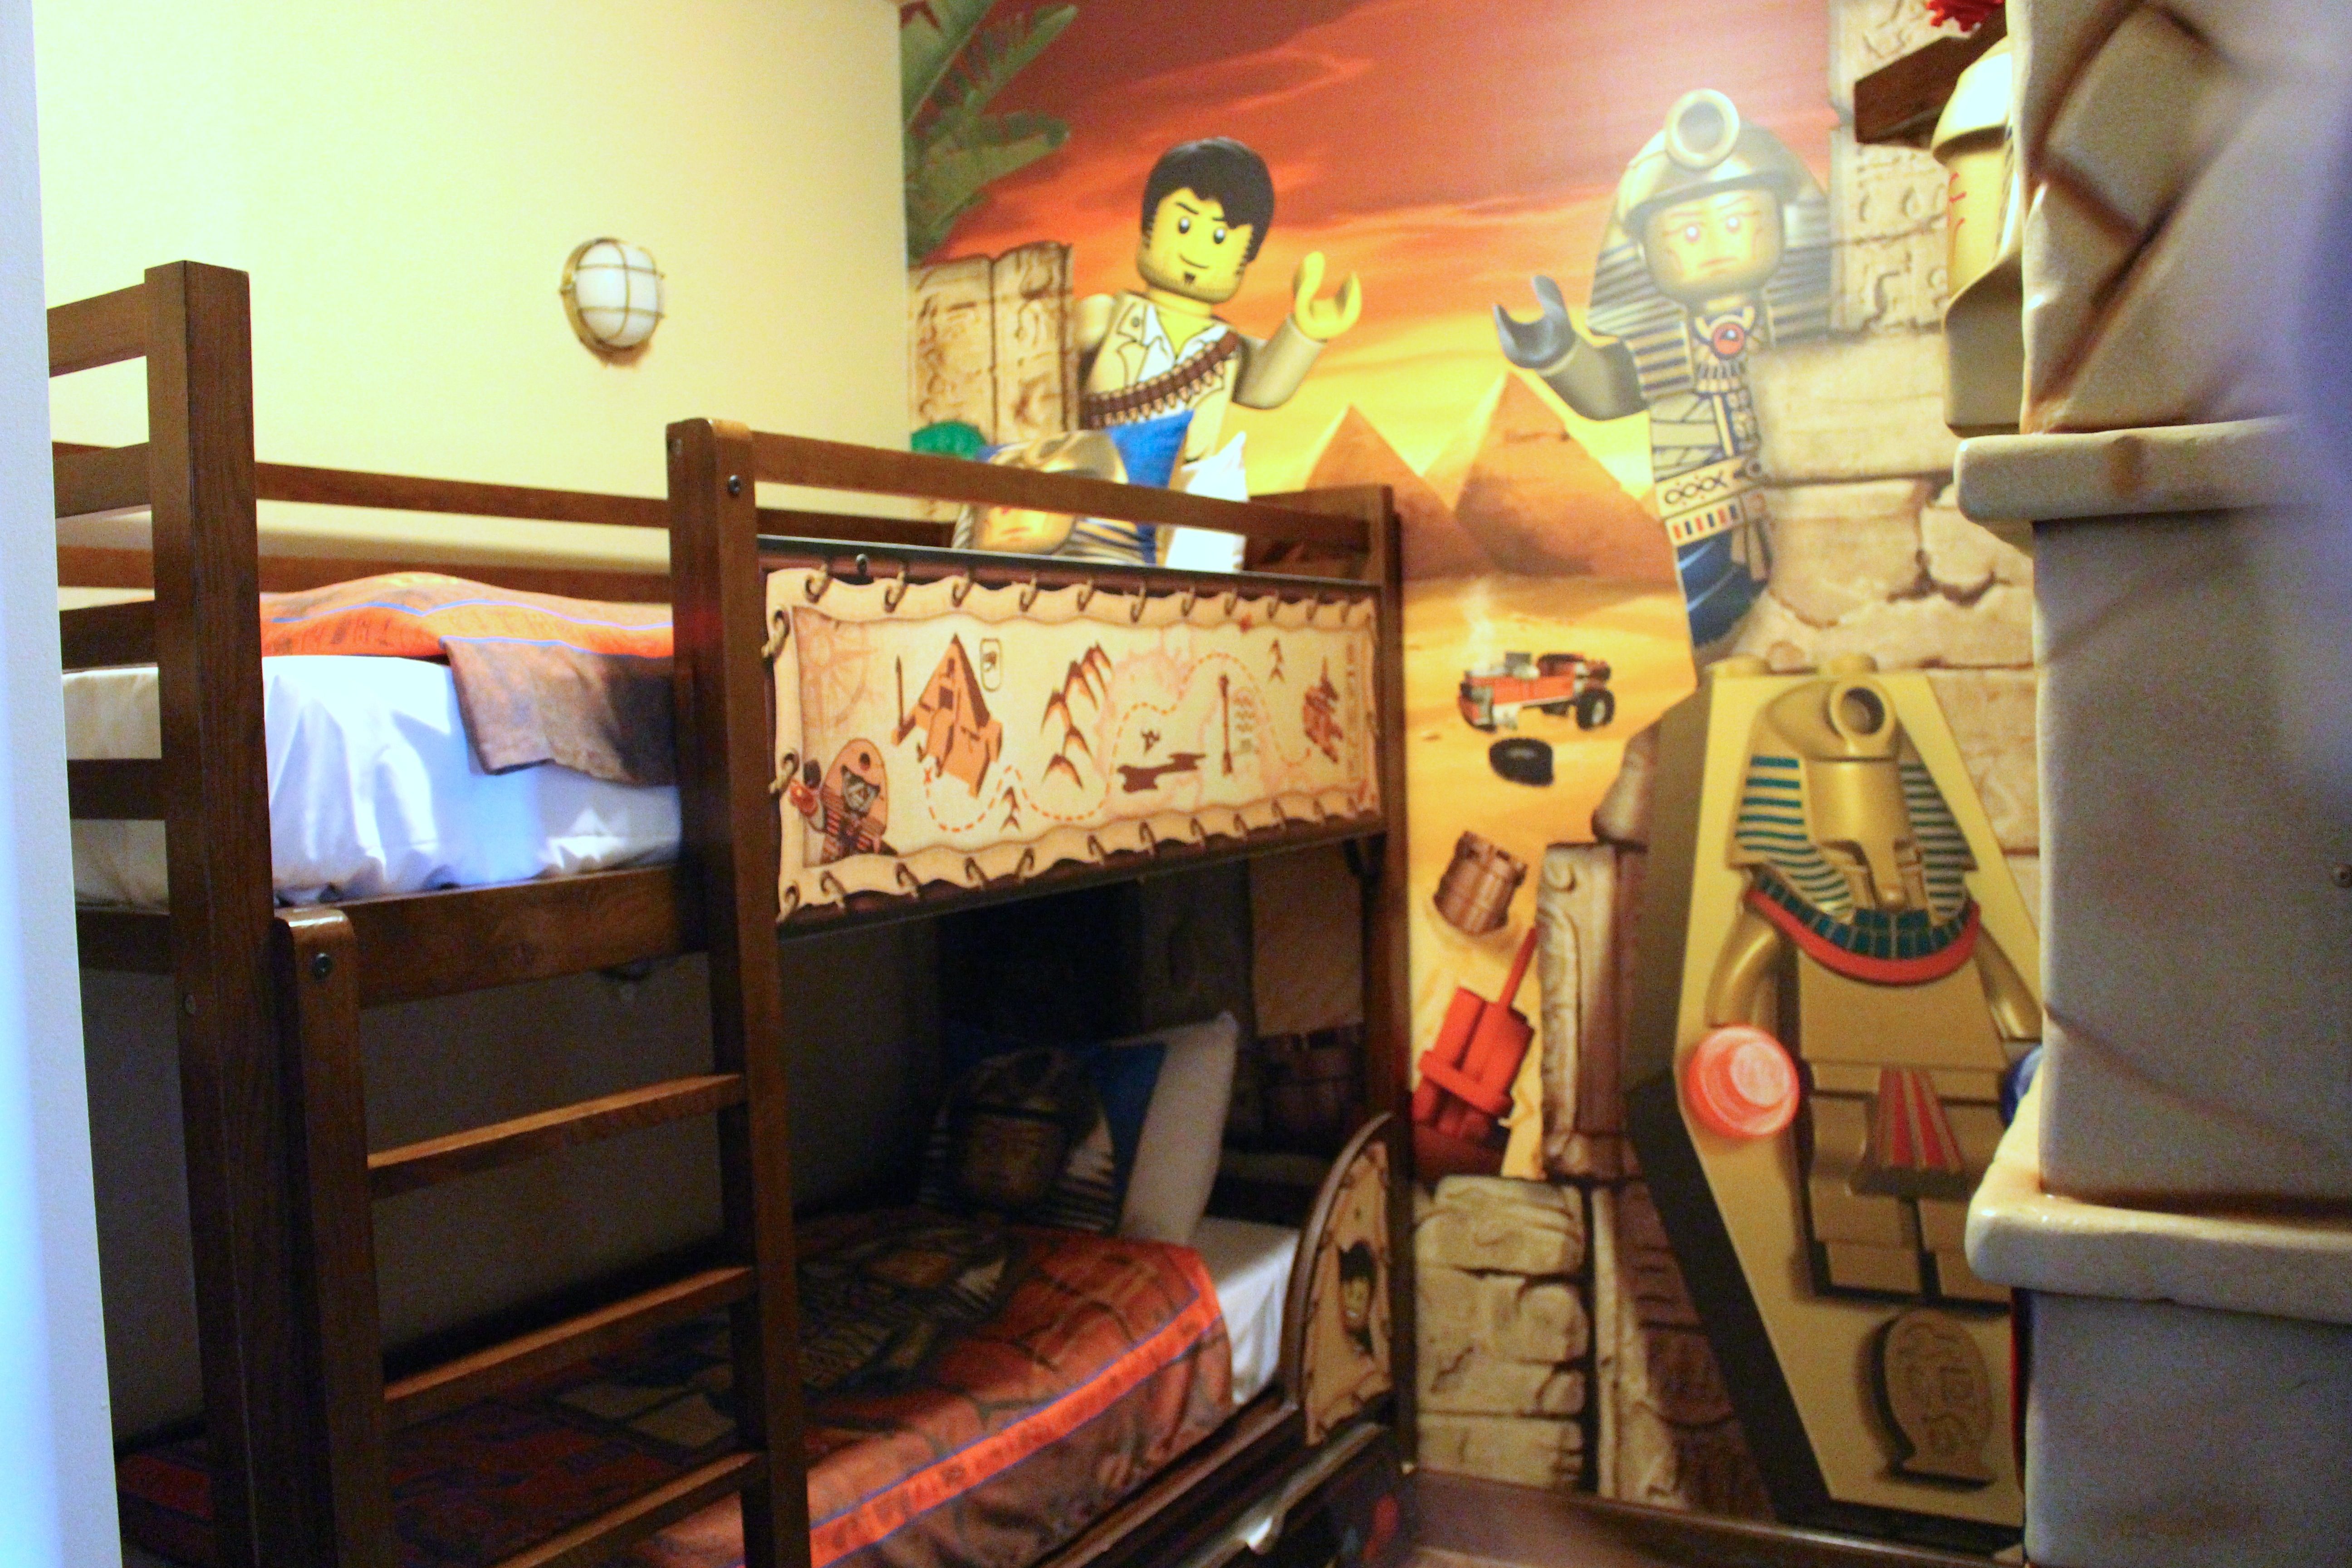 bunkbeds for three kids at LEGOLAND hotel